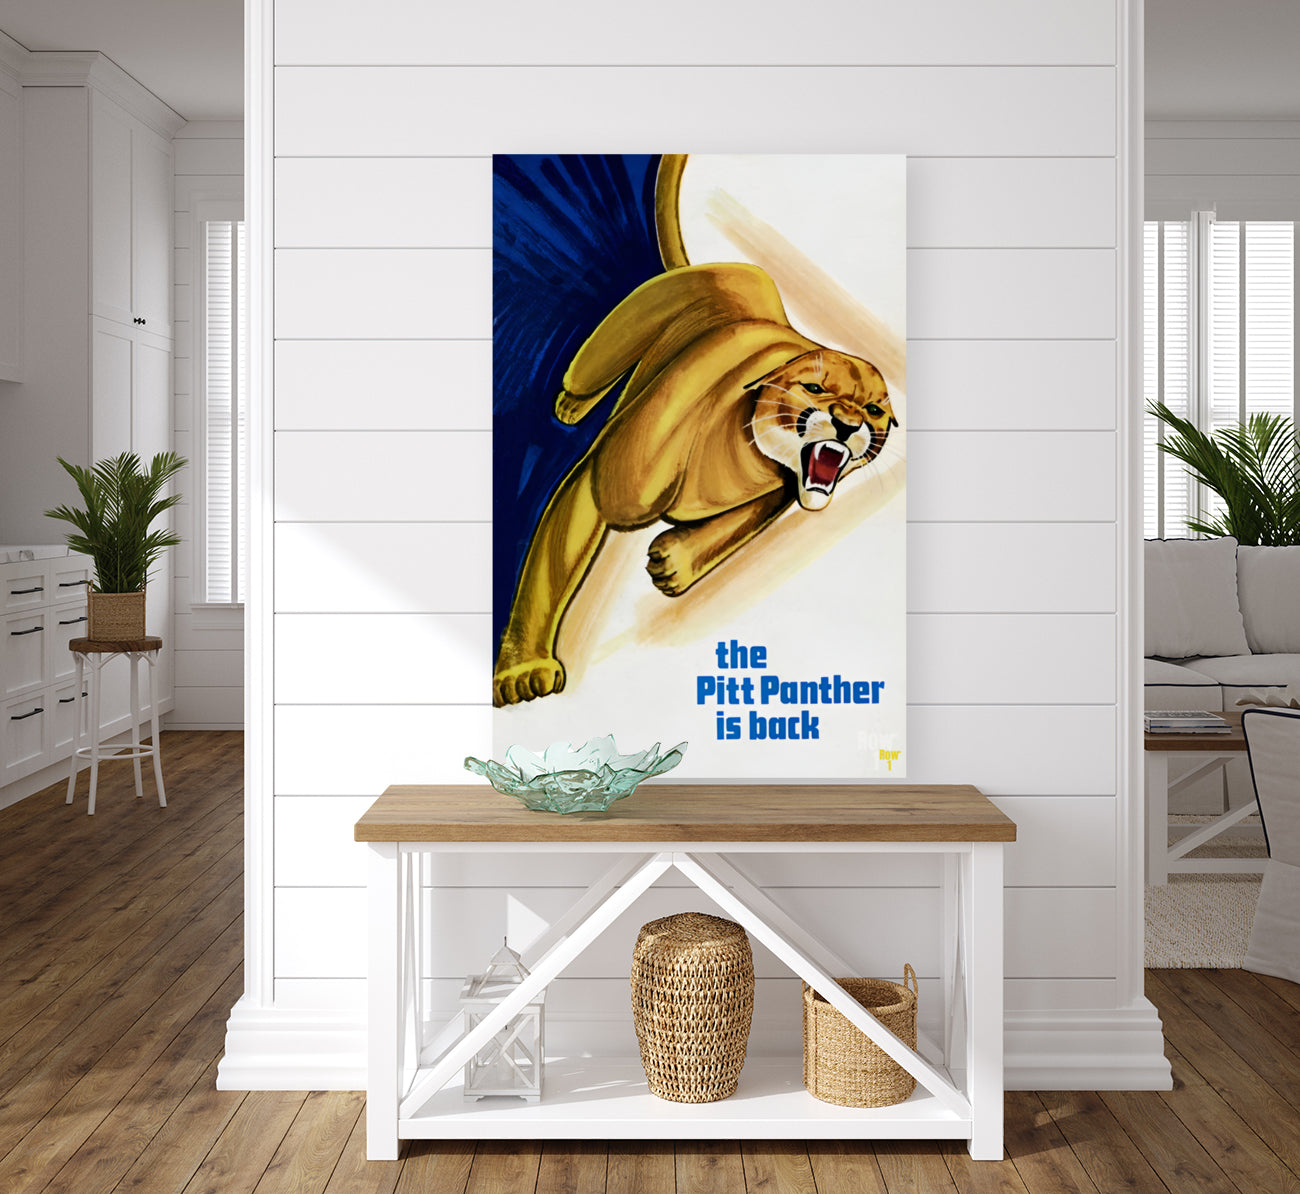 Vintage Pitt Panther Art from Row One Brand